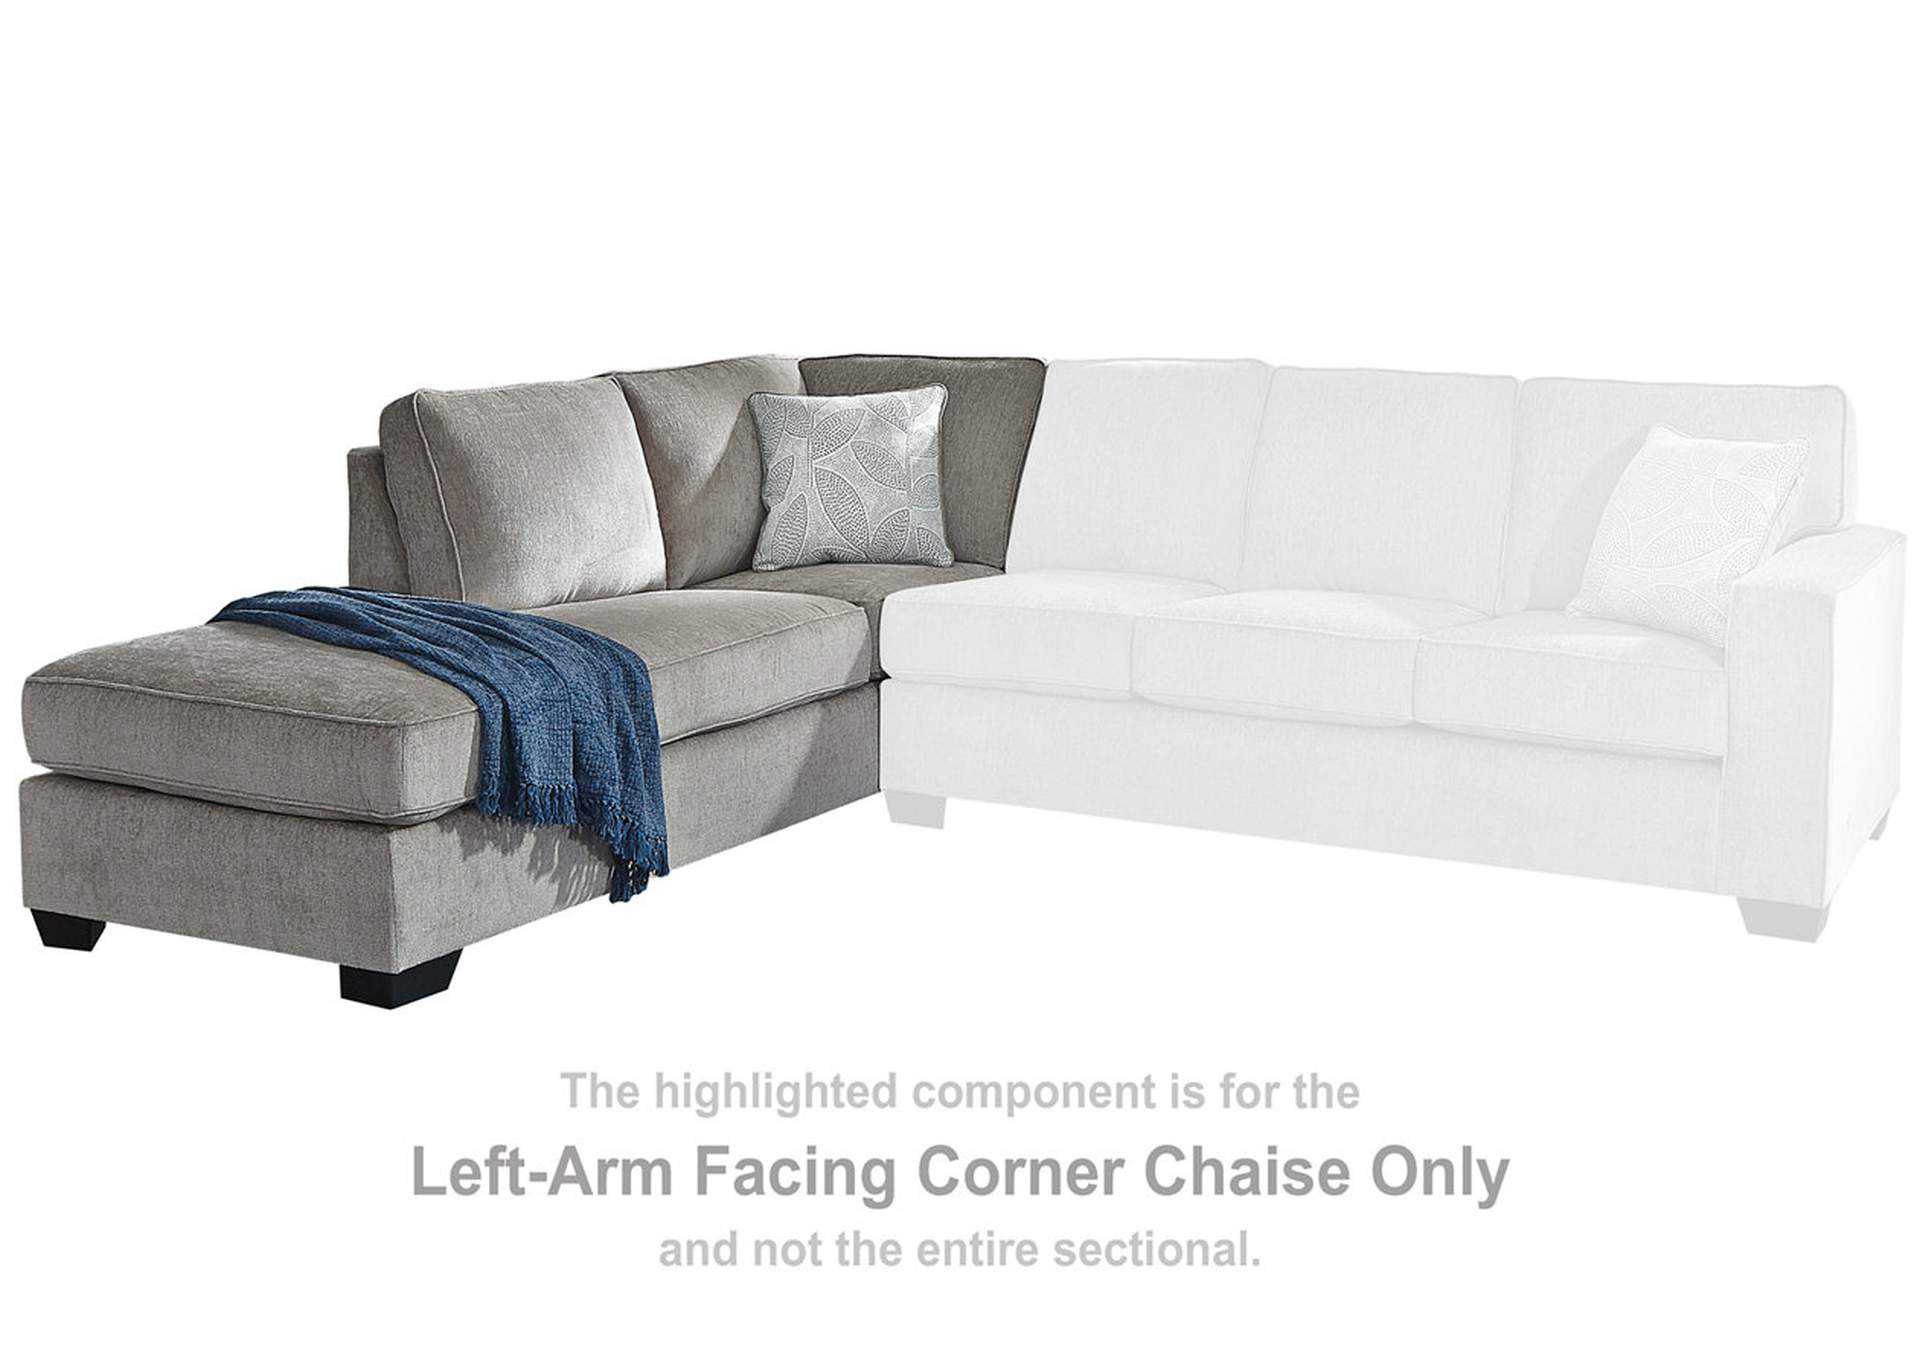 Altari 2-Piece Sectional with Chaise, Loveseat and Ottoman,Signature Design By Ashley